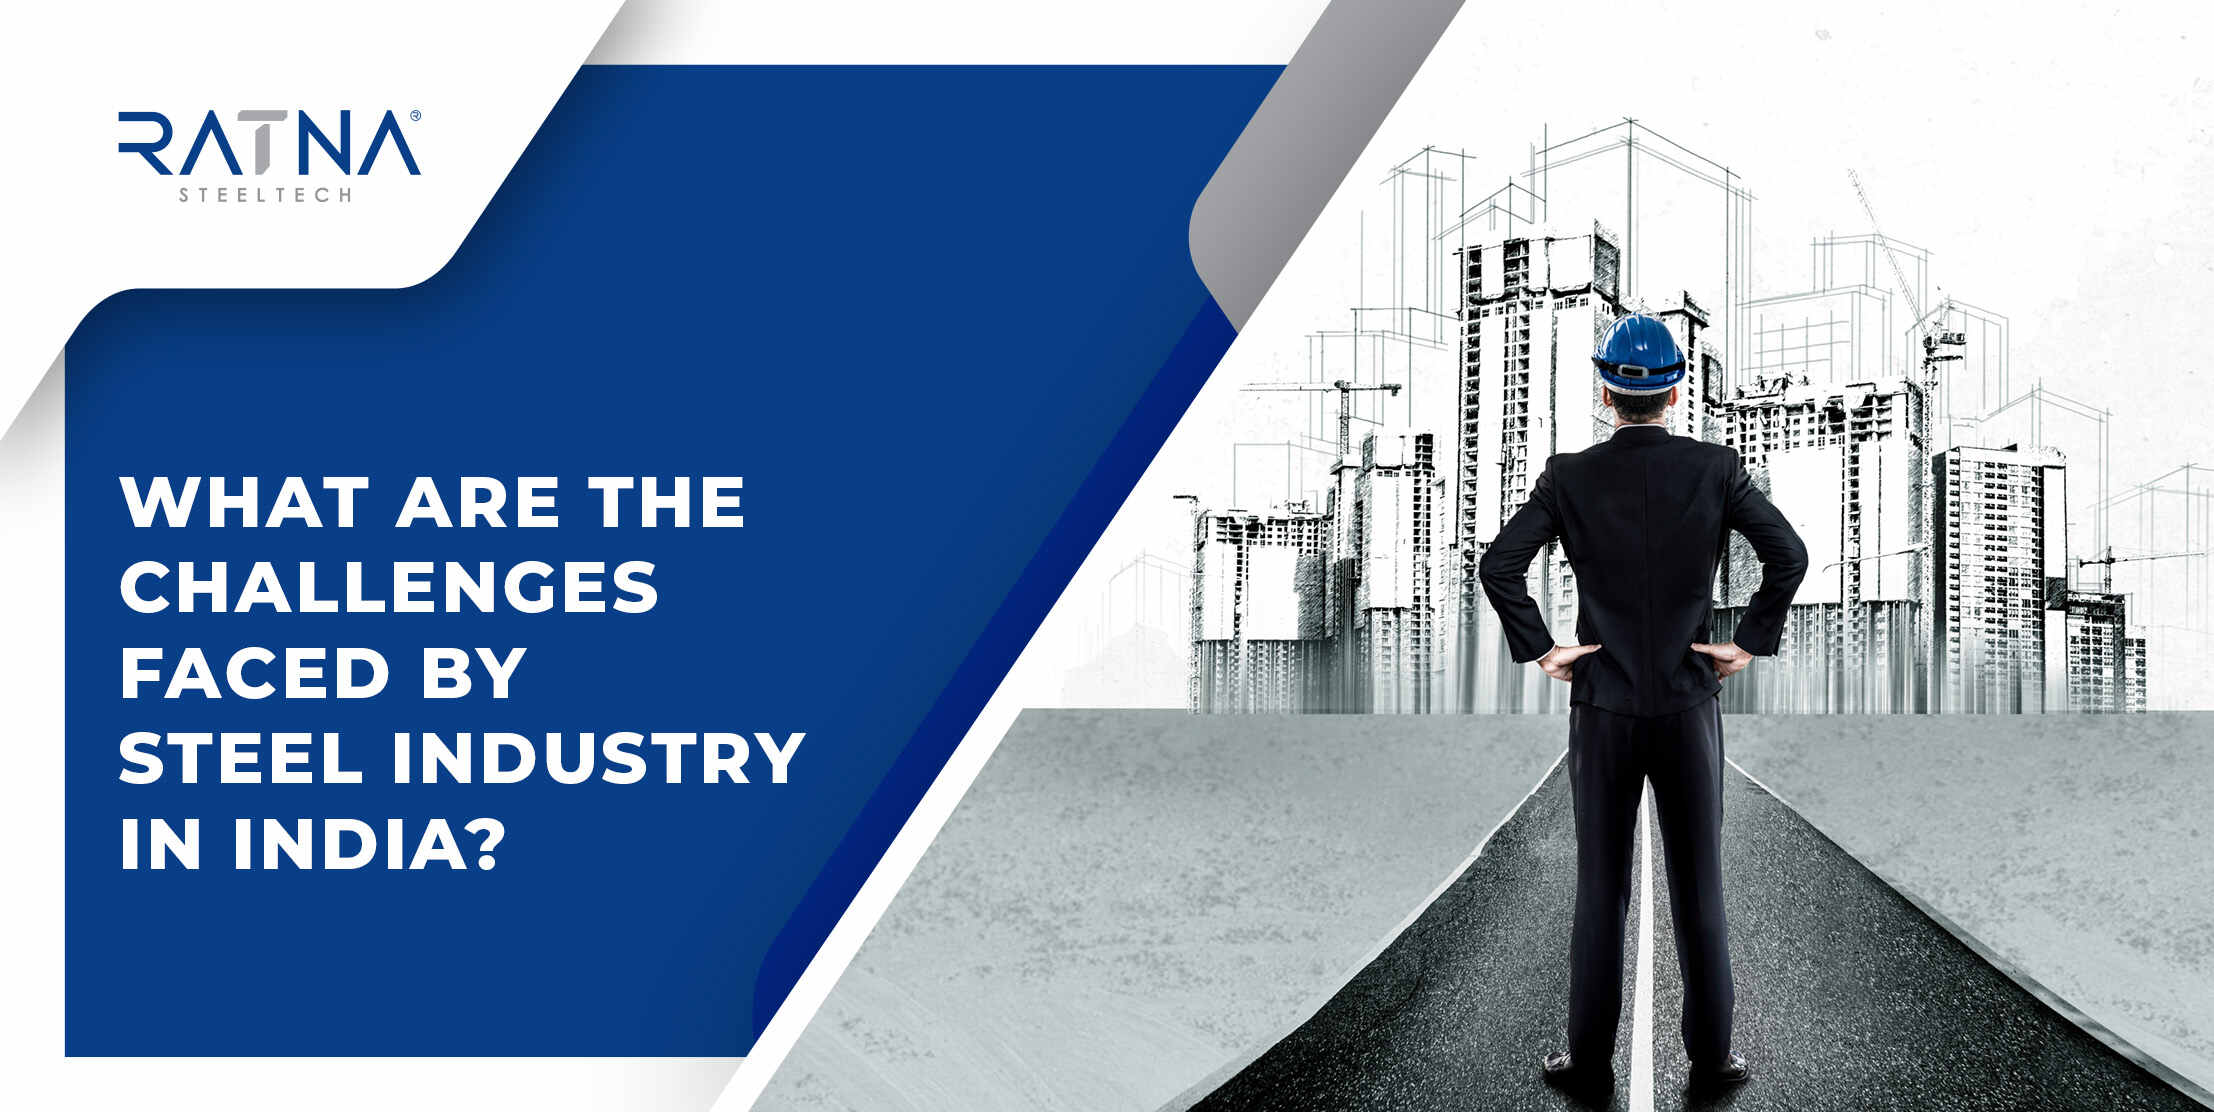 What are the challenges faced by the Steel Industry in India?